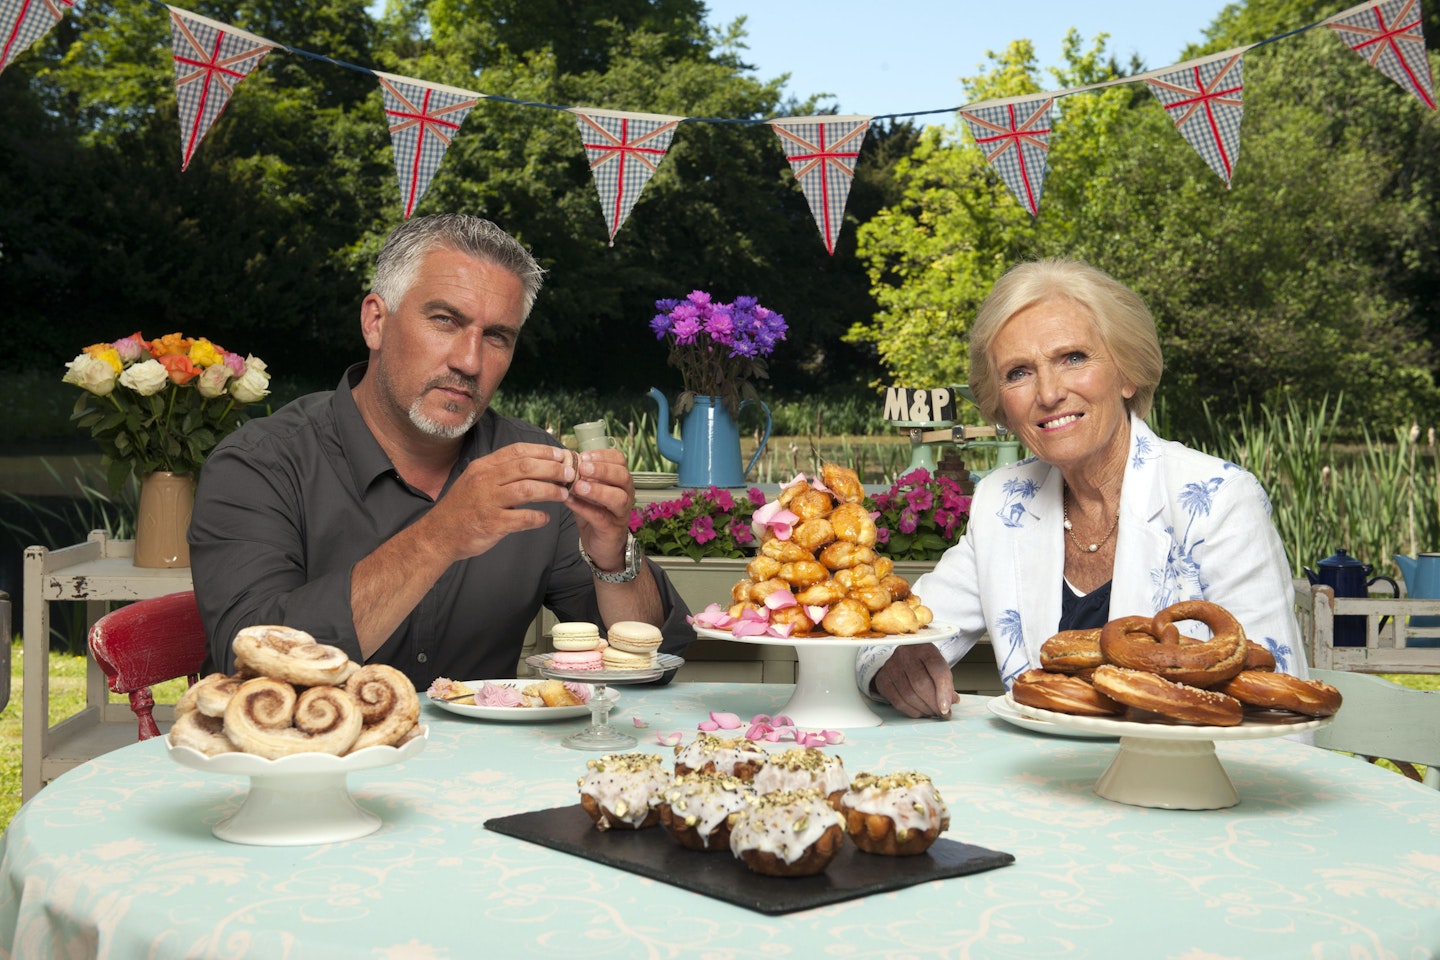 mary-berry-paul-hollywood-great-british-bake-off